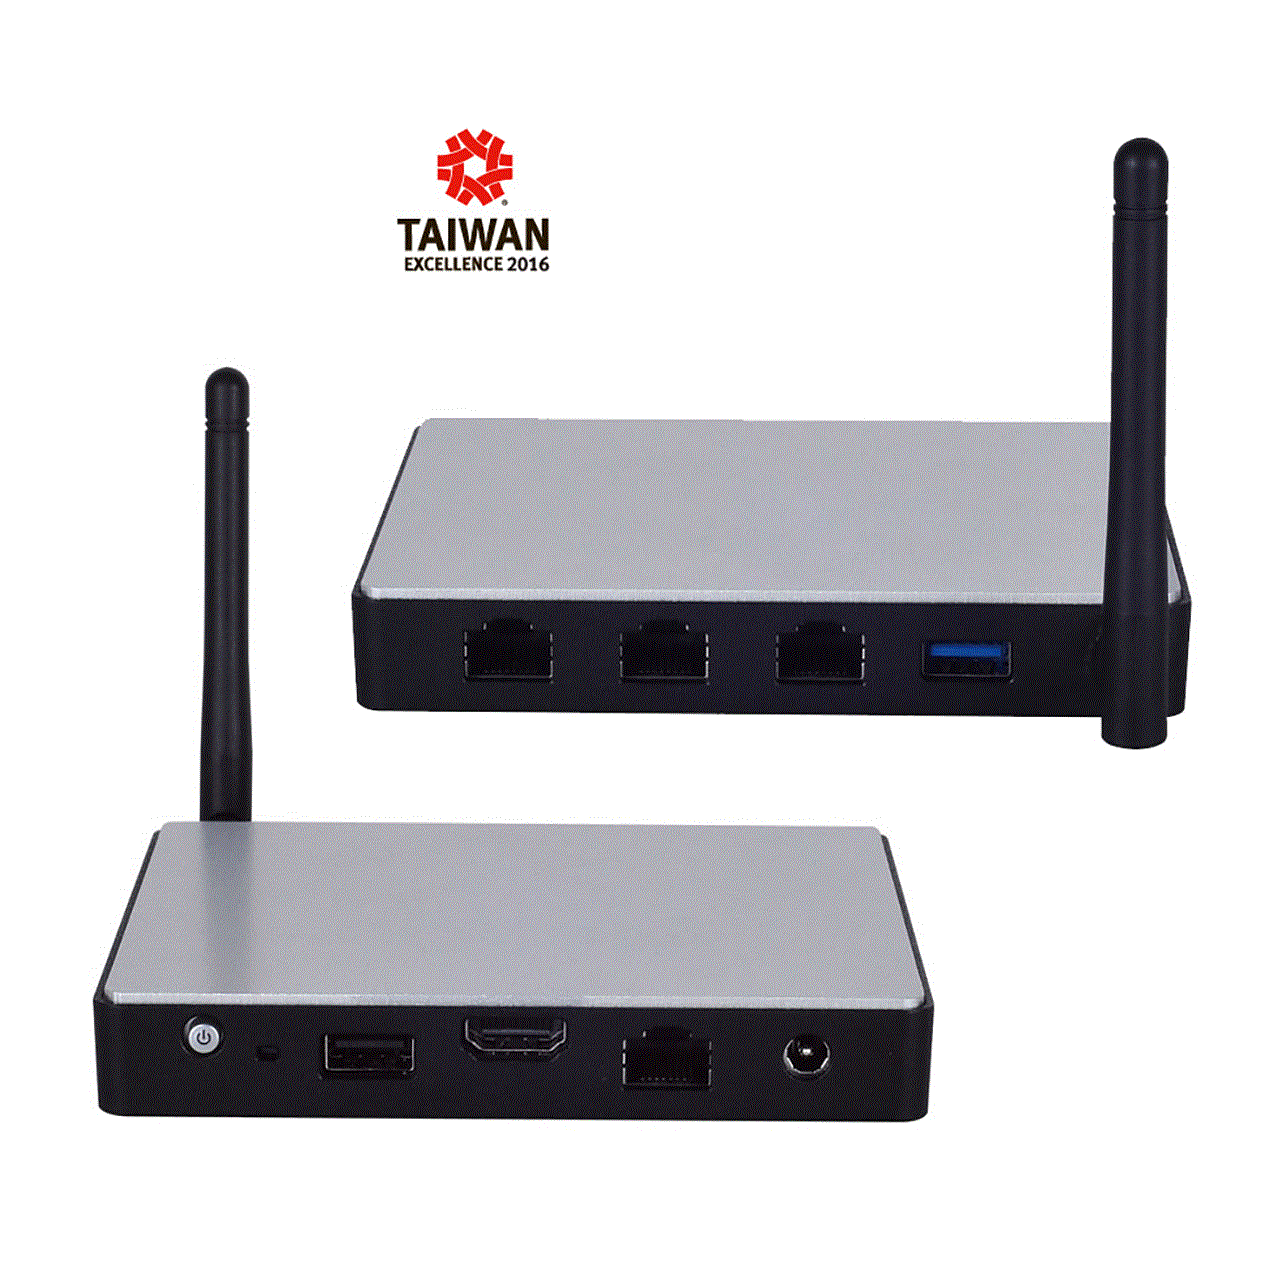 compact-fanless-x86-network-appliance-with-intel-bay-trail-platform-atom-e3800-cpu